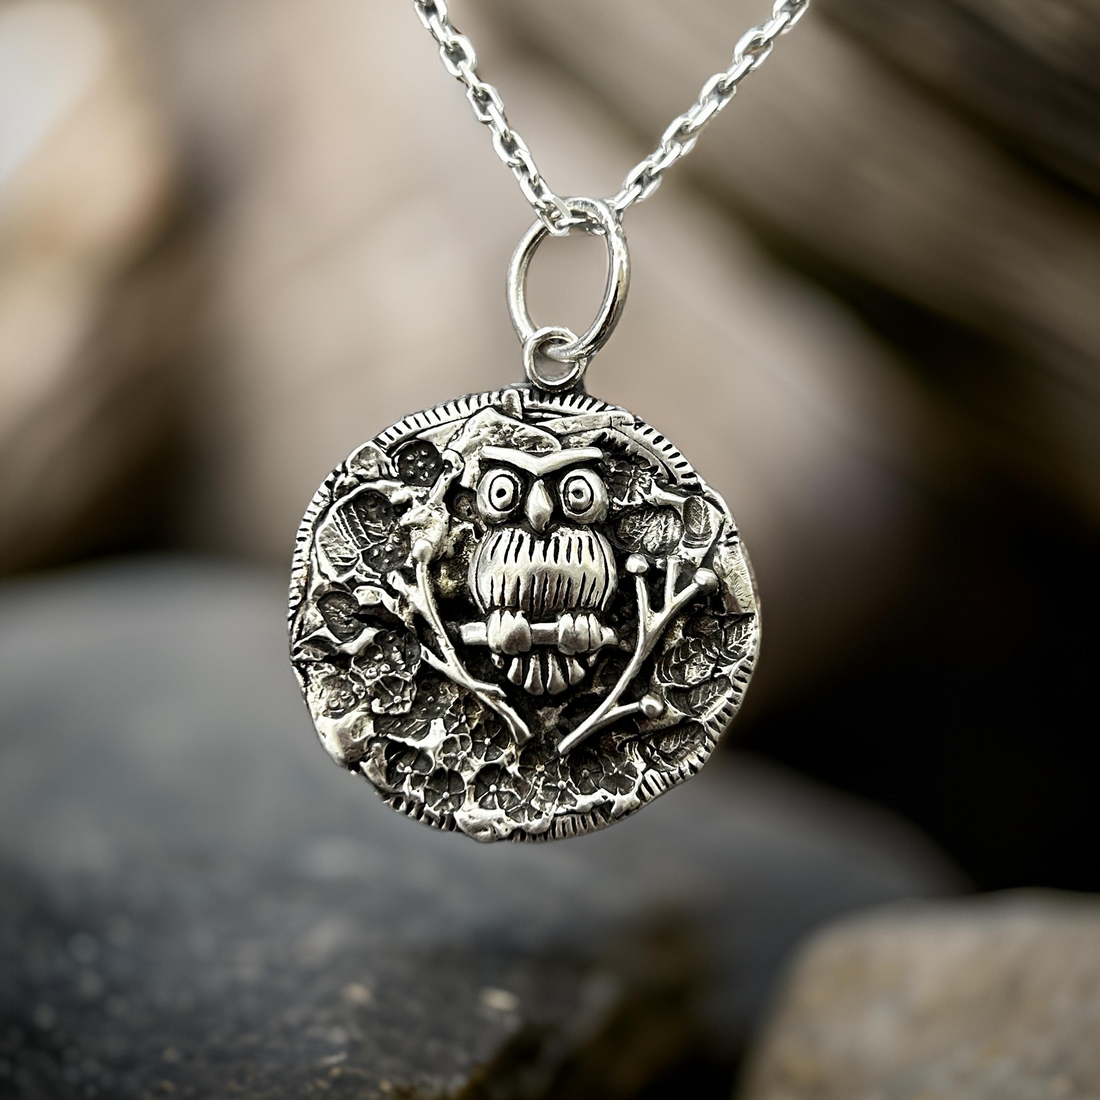 Owl Necklace Handcrafted in Sterling Silver